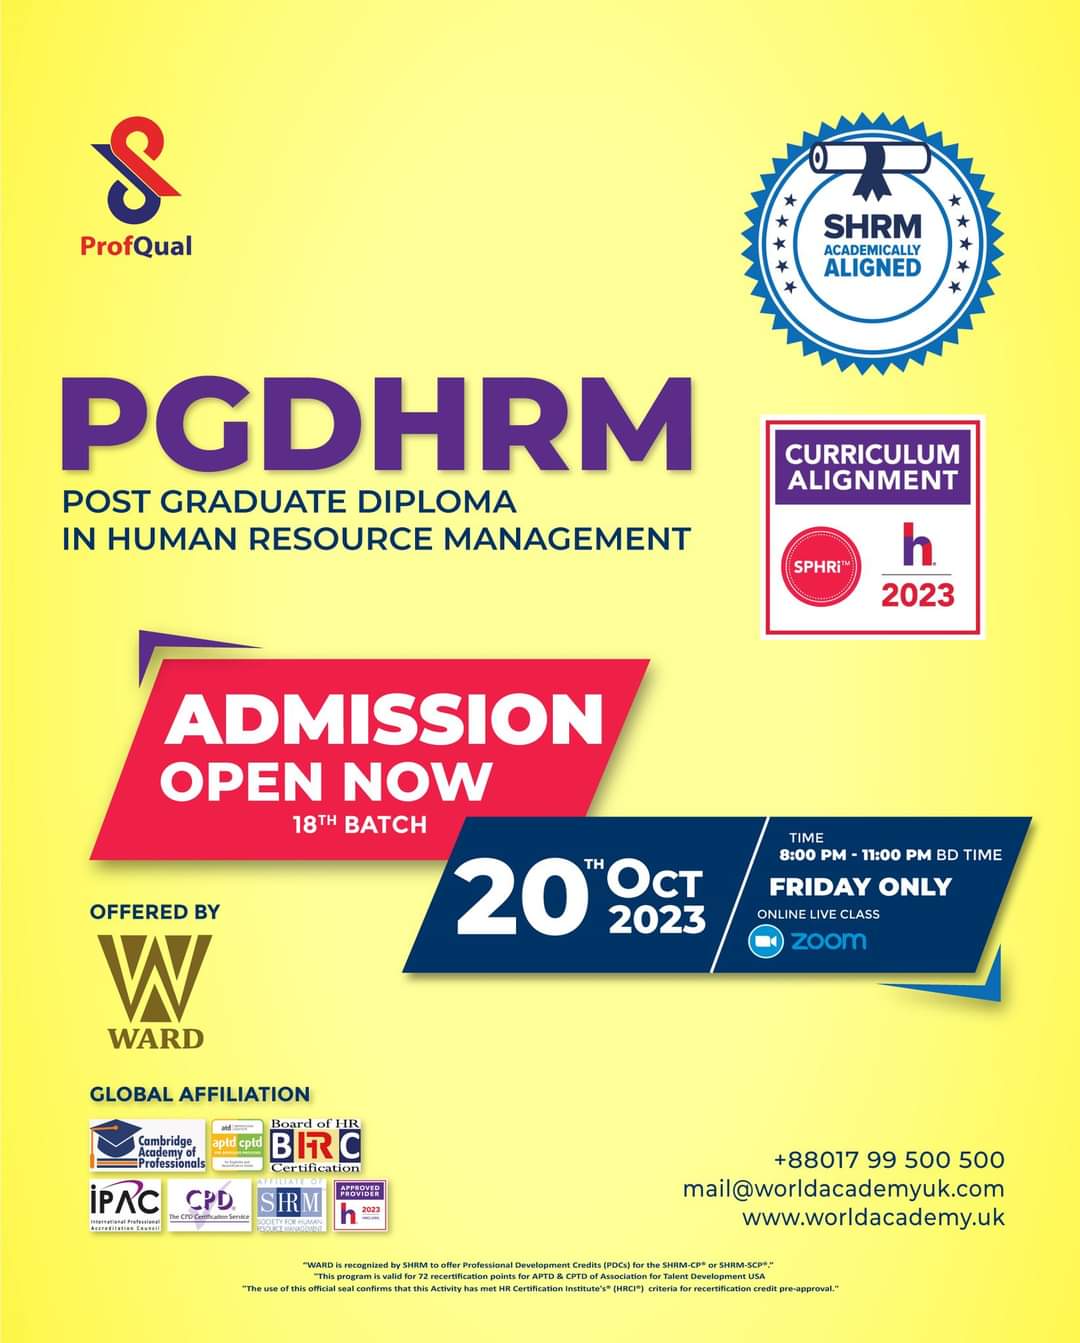 PGD Course in Bangladesh | PGD in HRM (Human Resource Management)